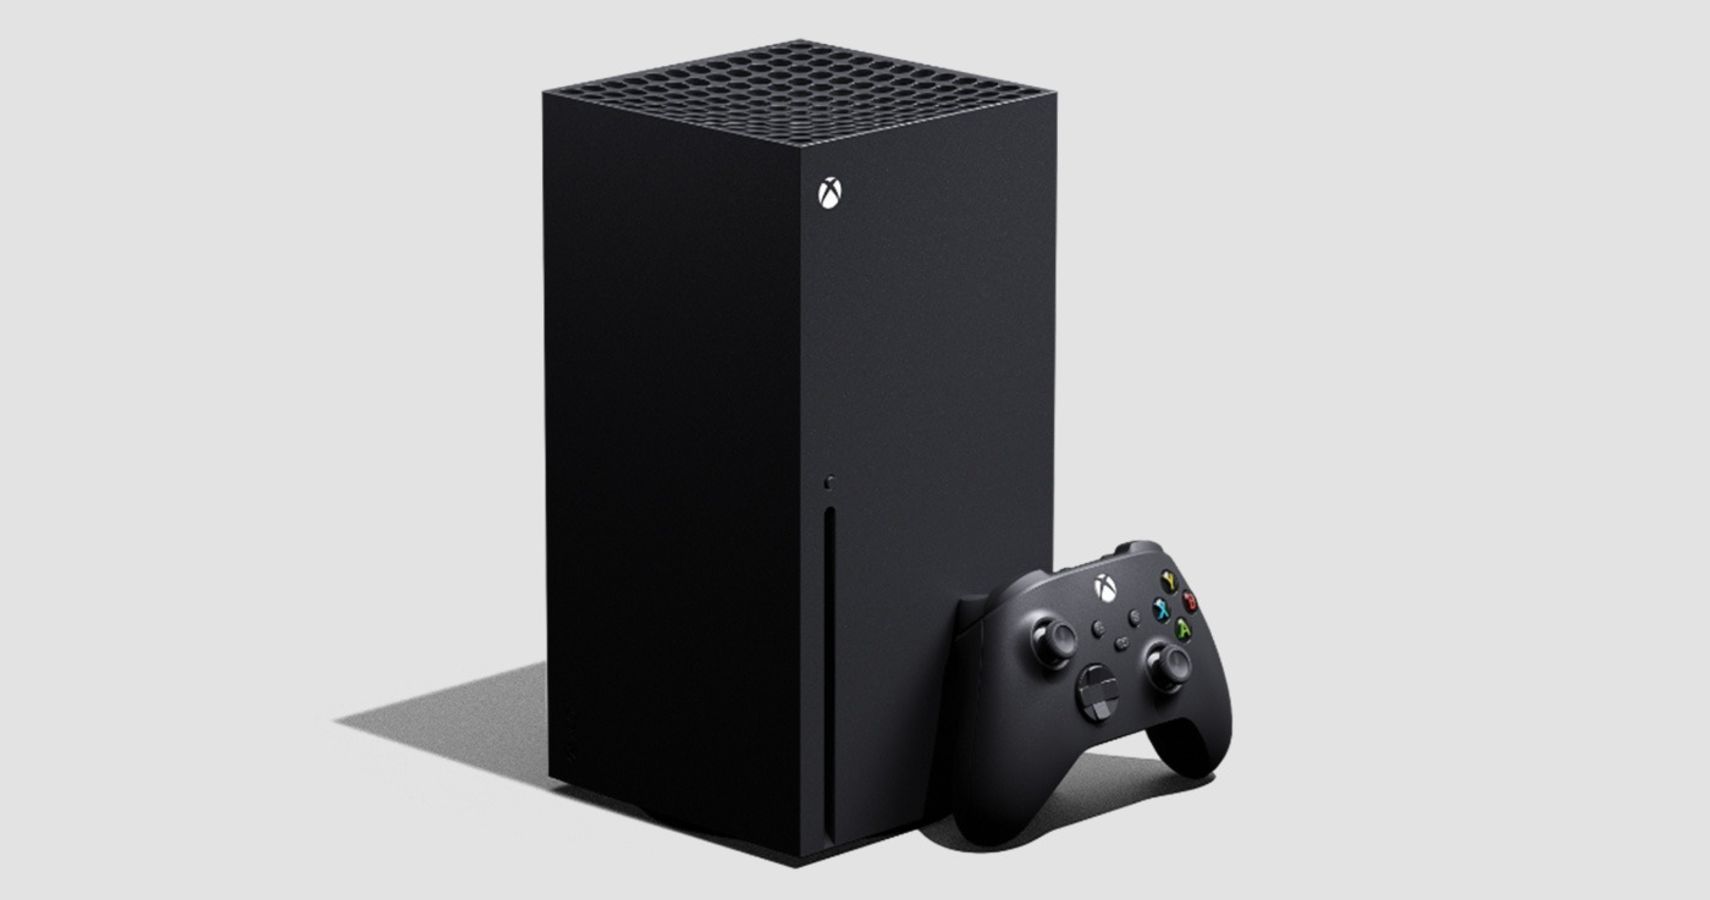 Inconsequential Decision By Microsoft Will Cost Xbox Series X Owners $1 Billion On Electricity Bills